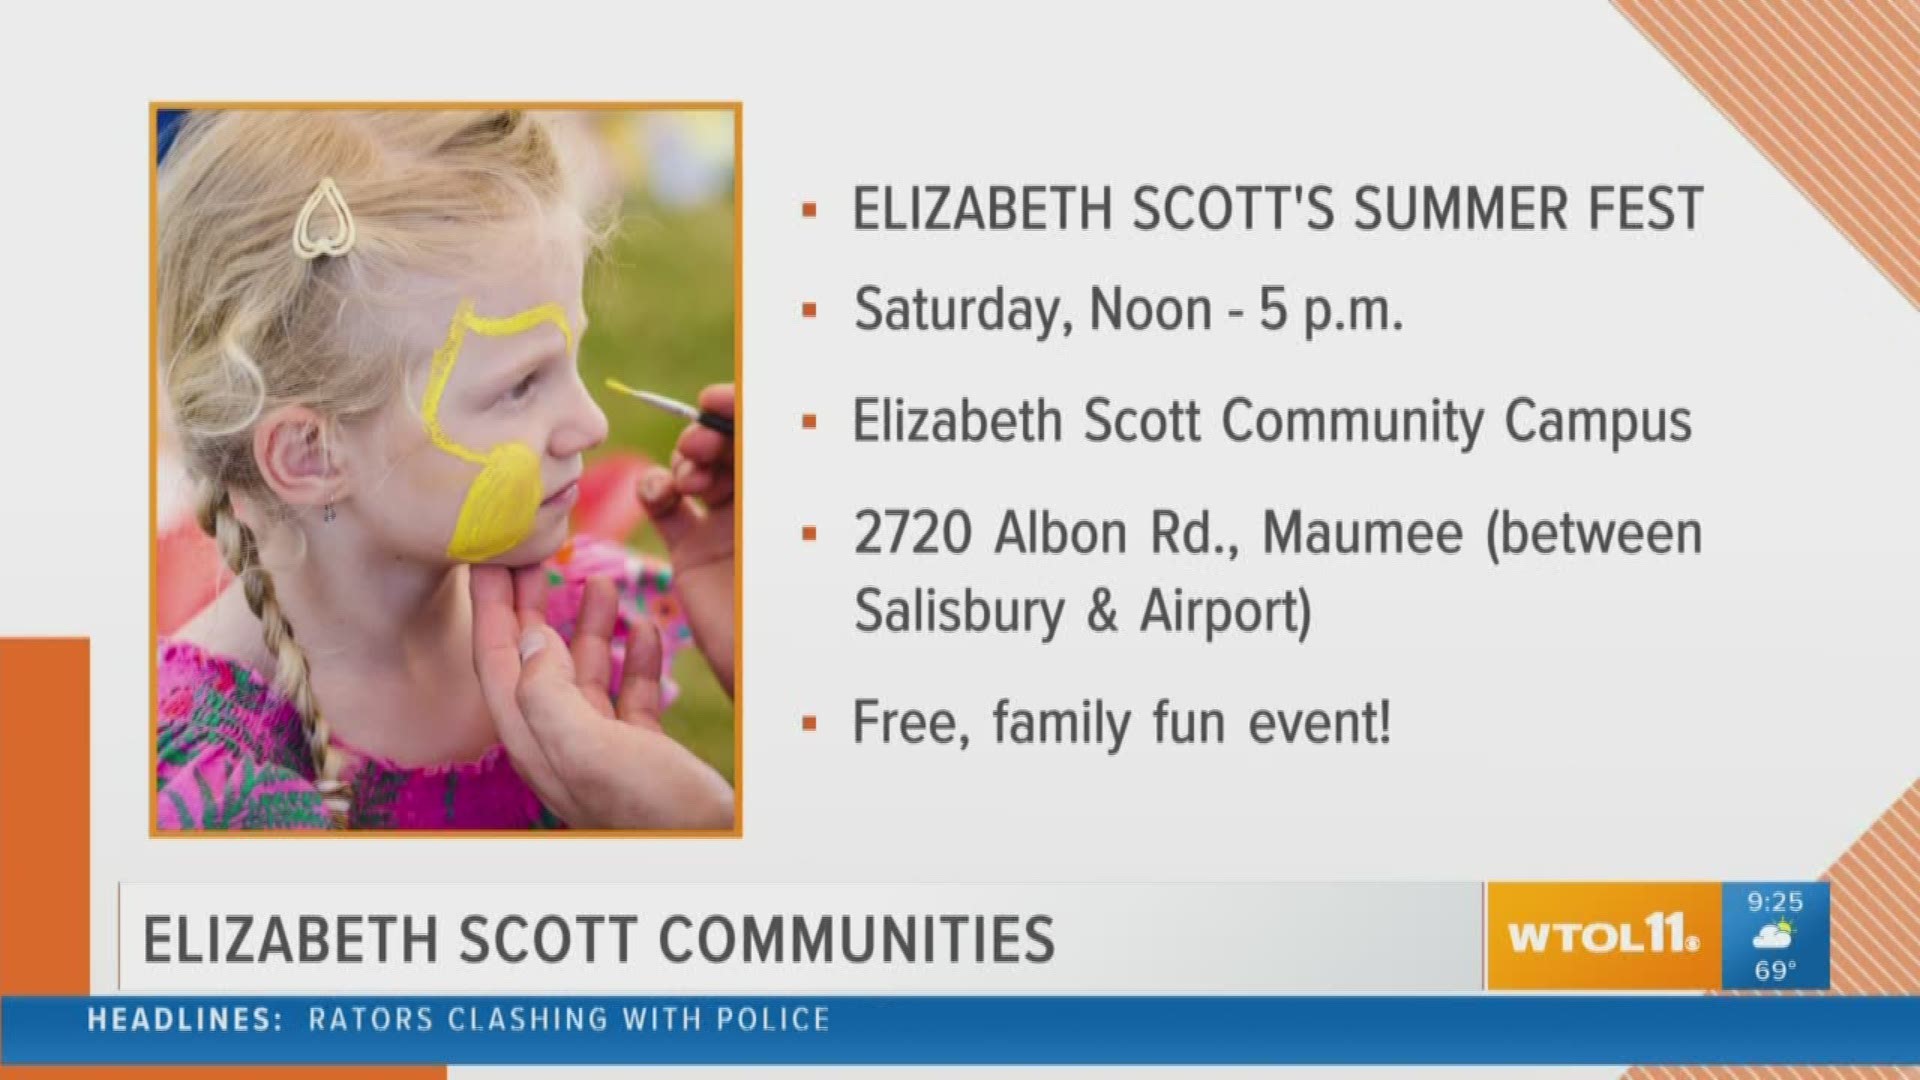 Elizabeth Scott Communities in Maumee invite you to Summer Fest, a free and family-friendly event!